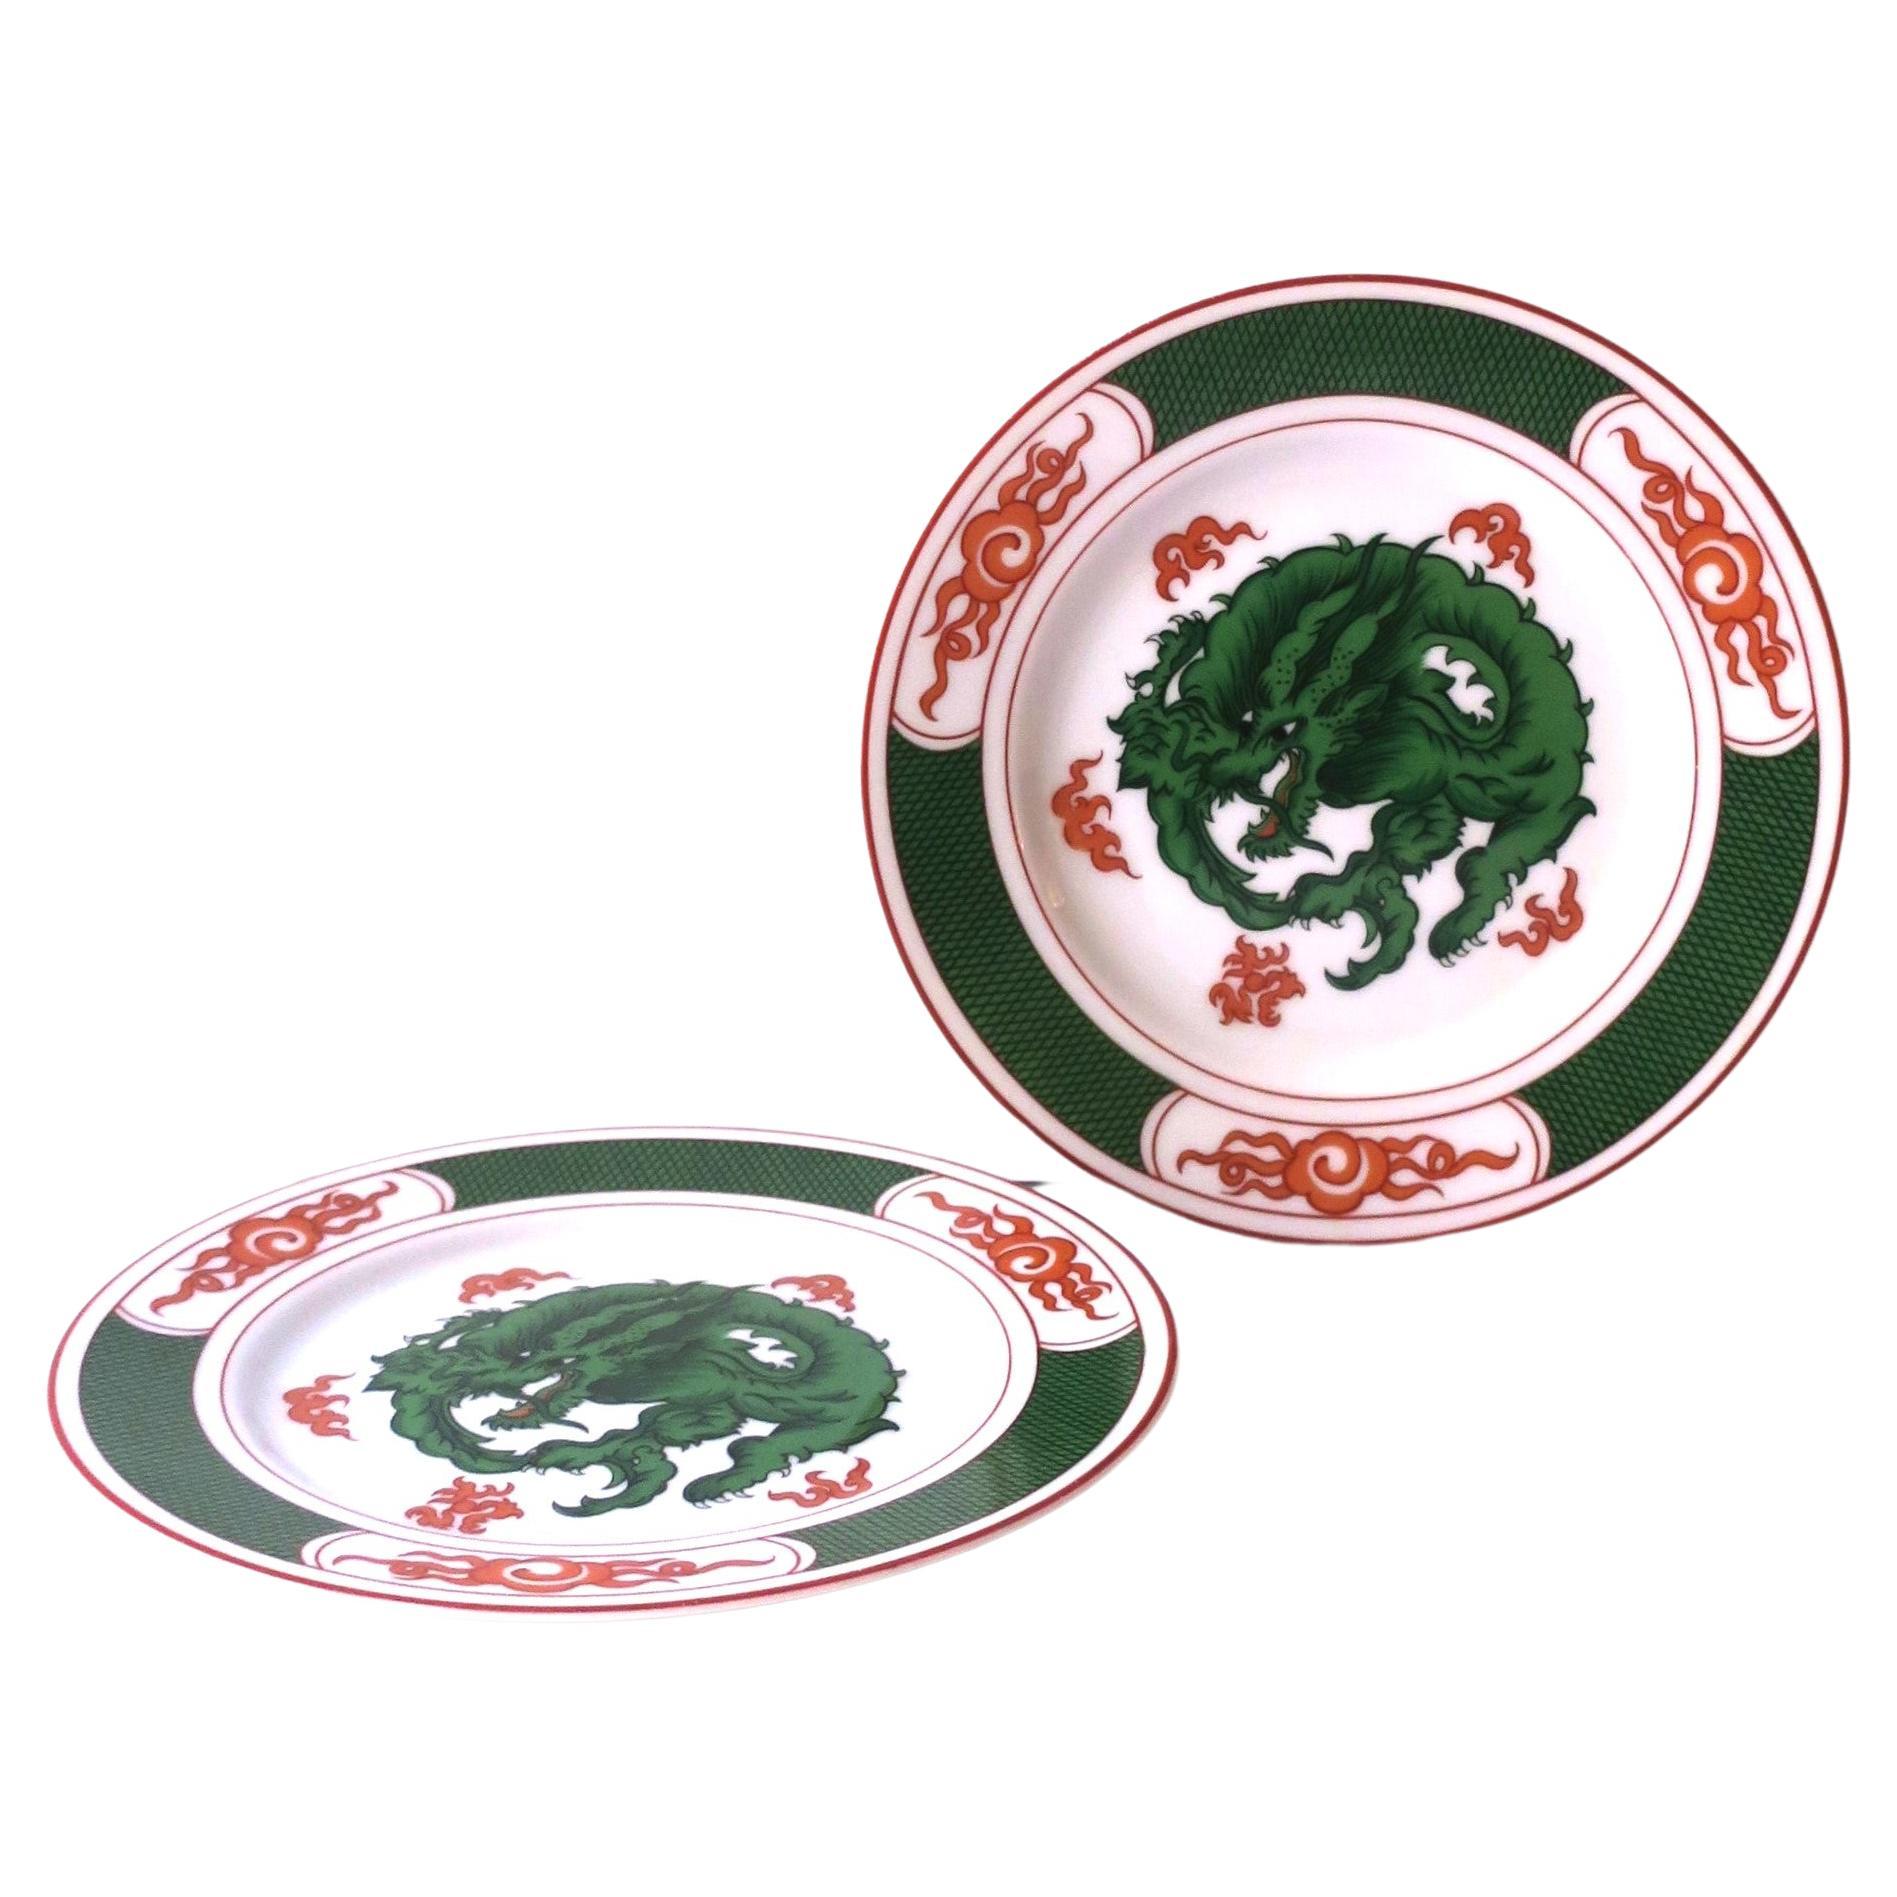 20th Century Porcelain Plates with Dragon Design, Set of 2